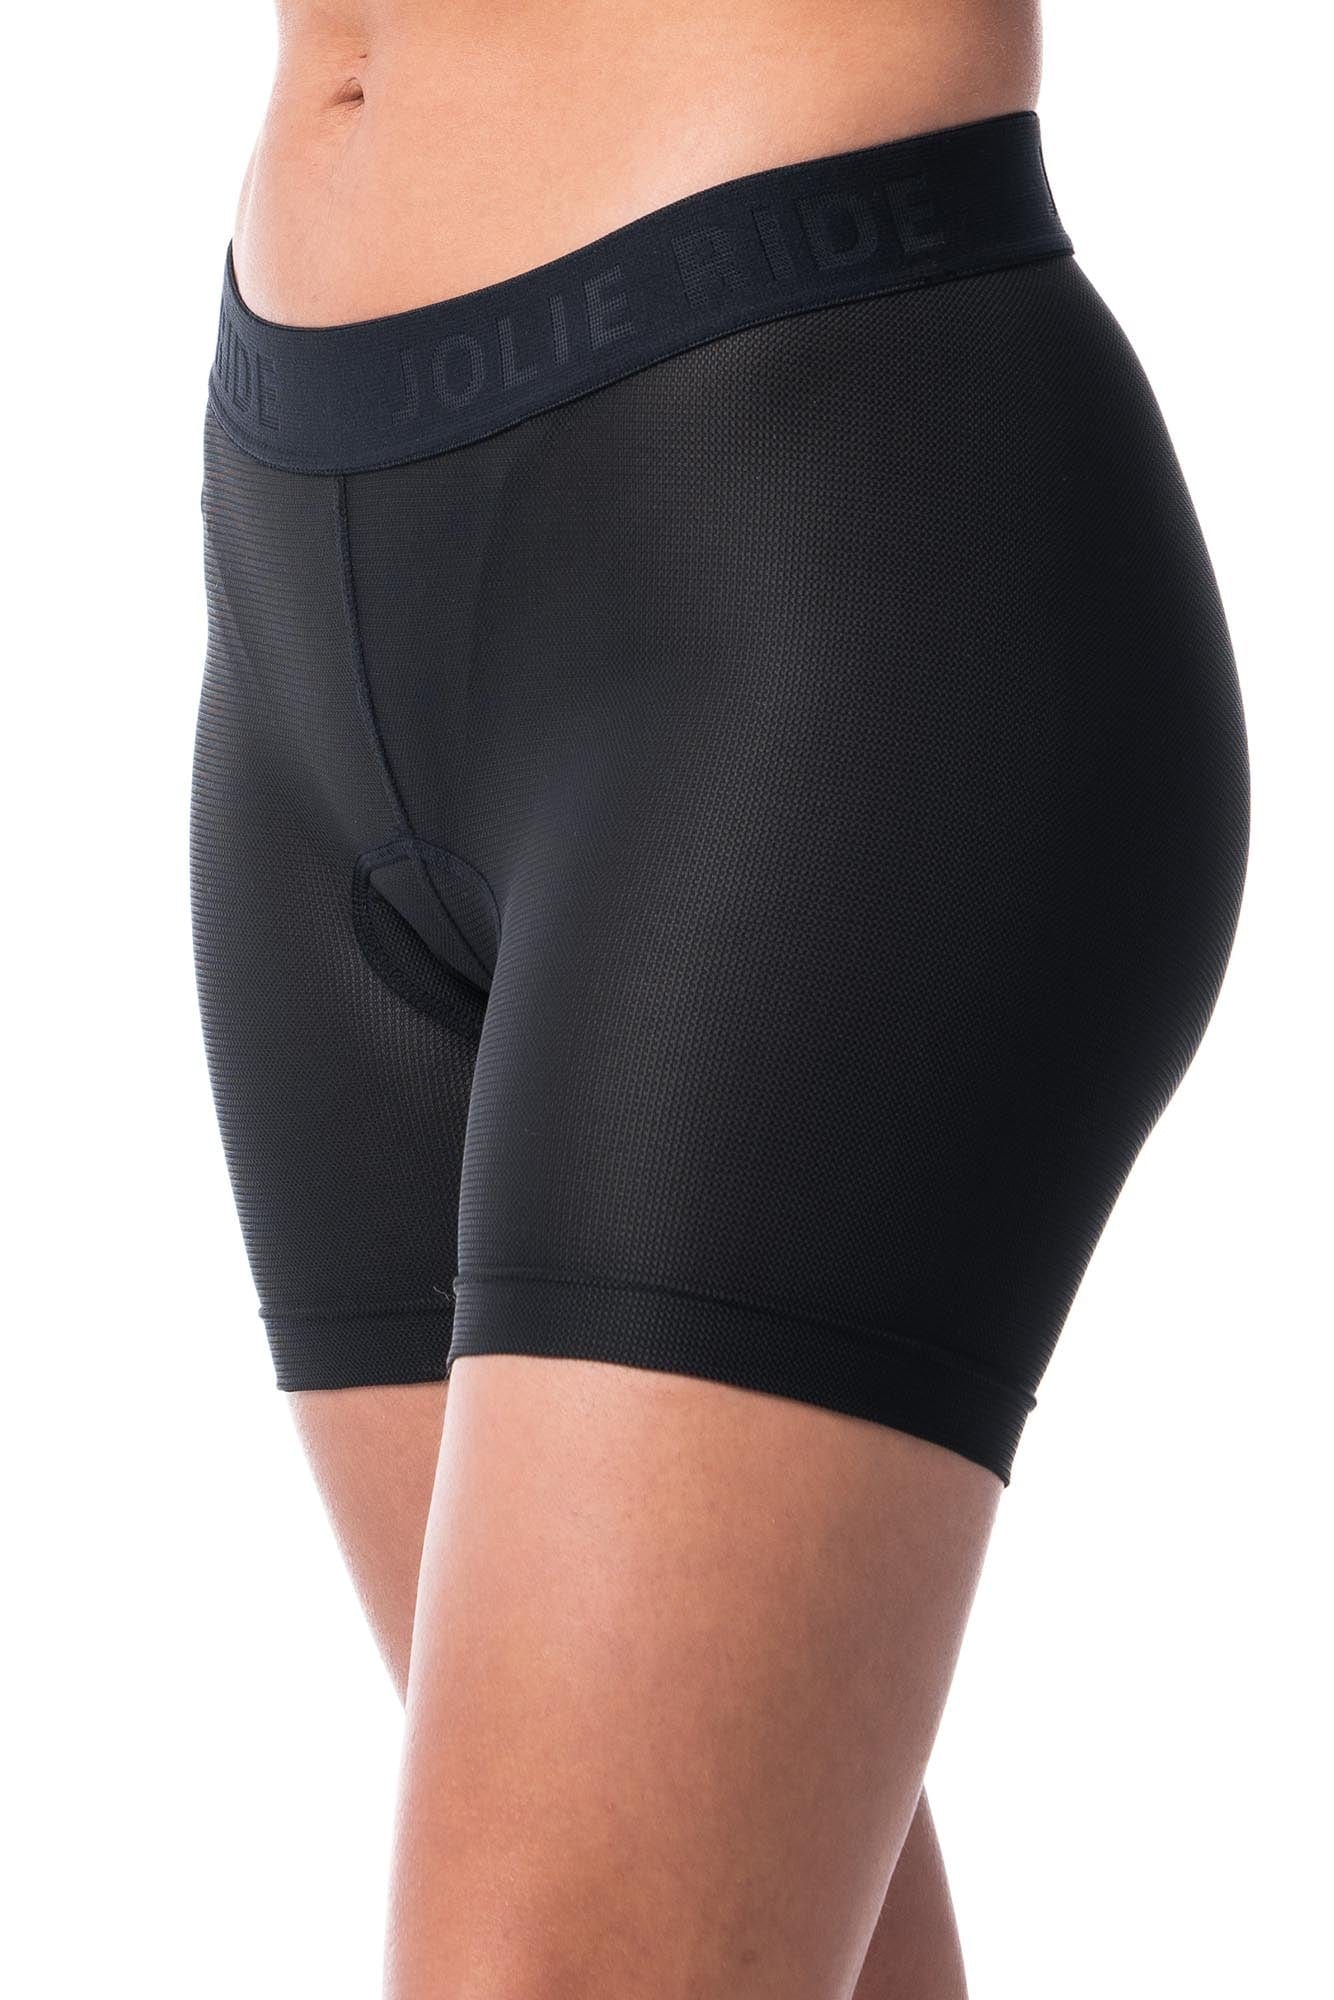 JolieRide Cycling shorts liner cycling shorts for comfortable and dry wear